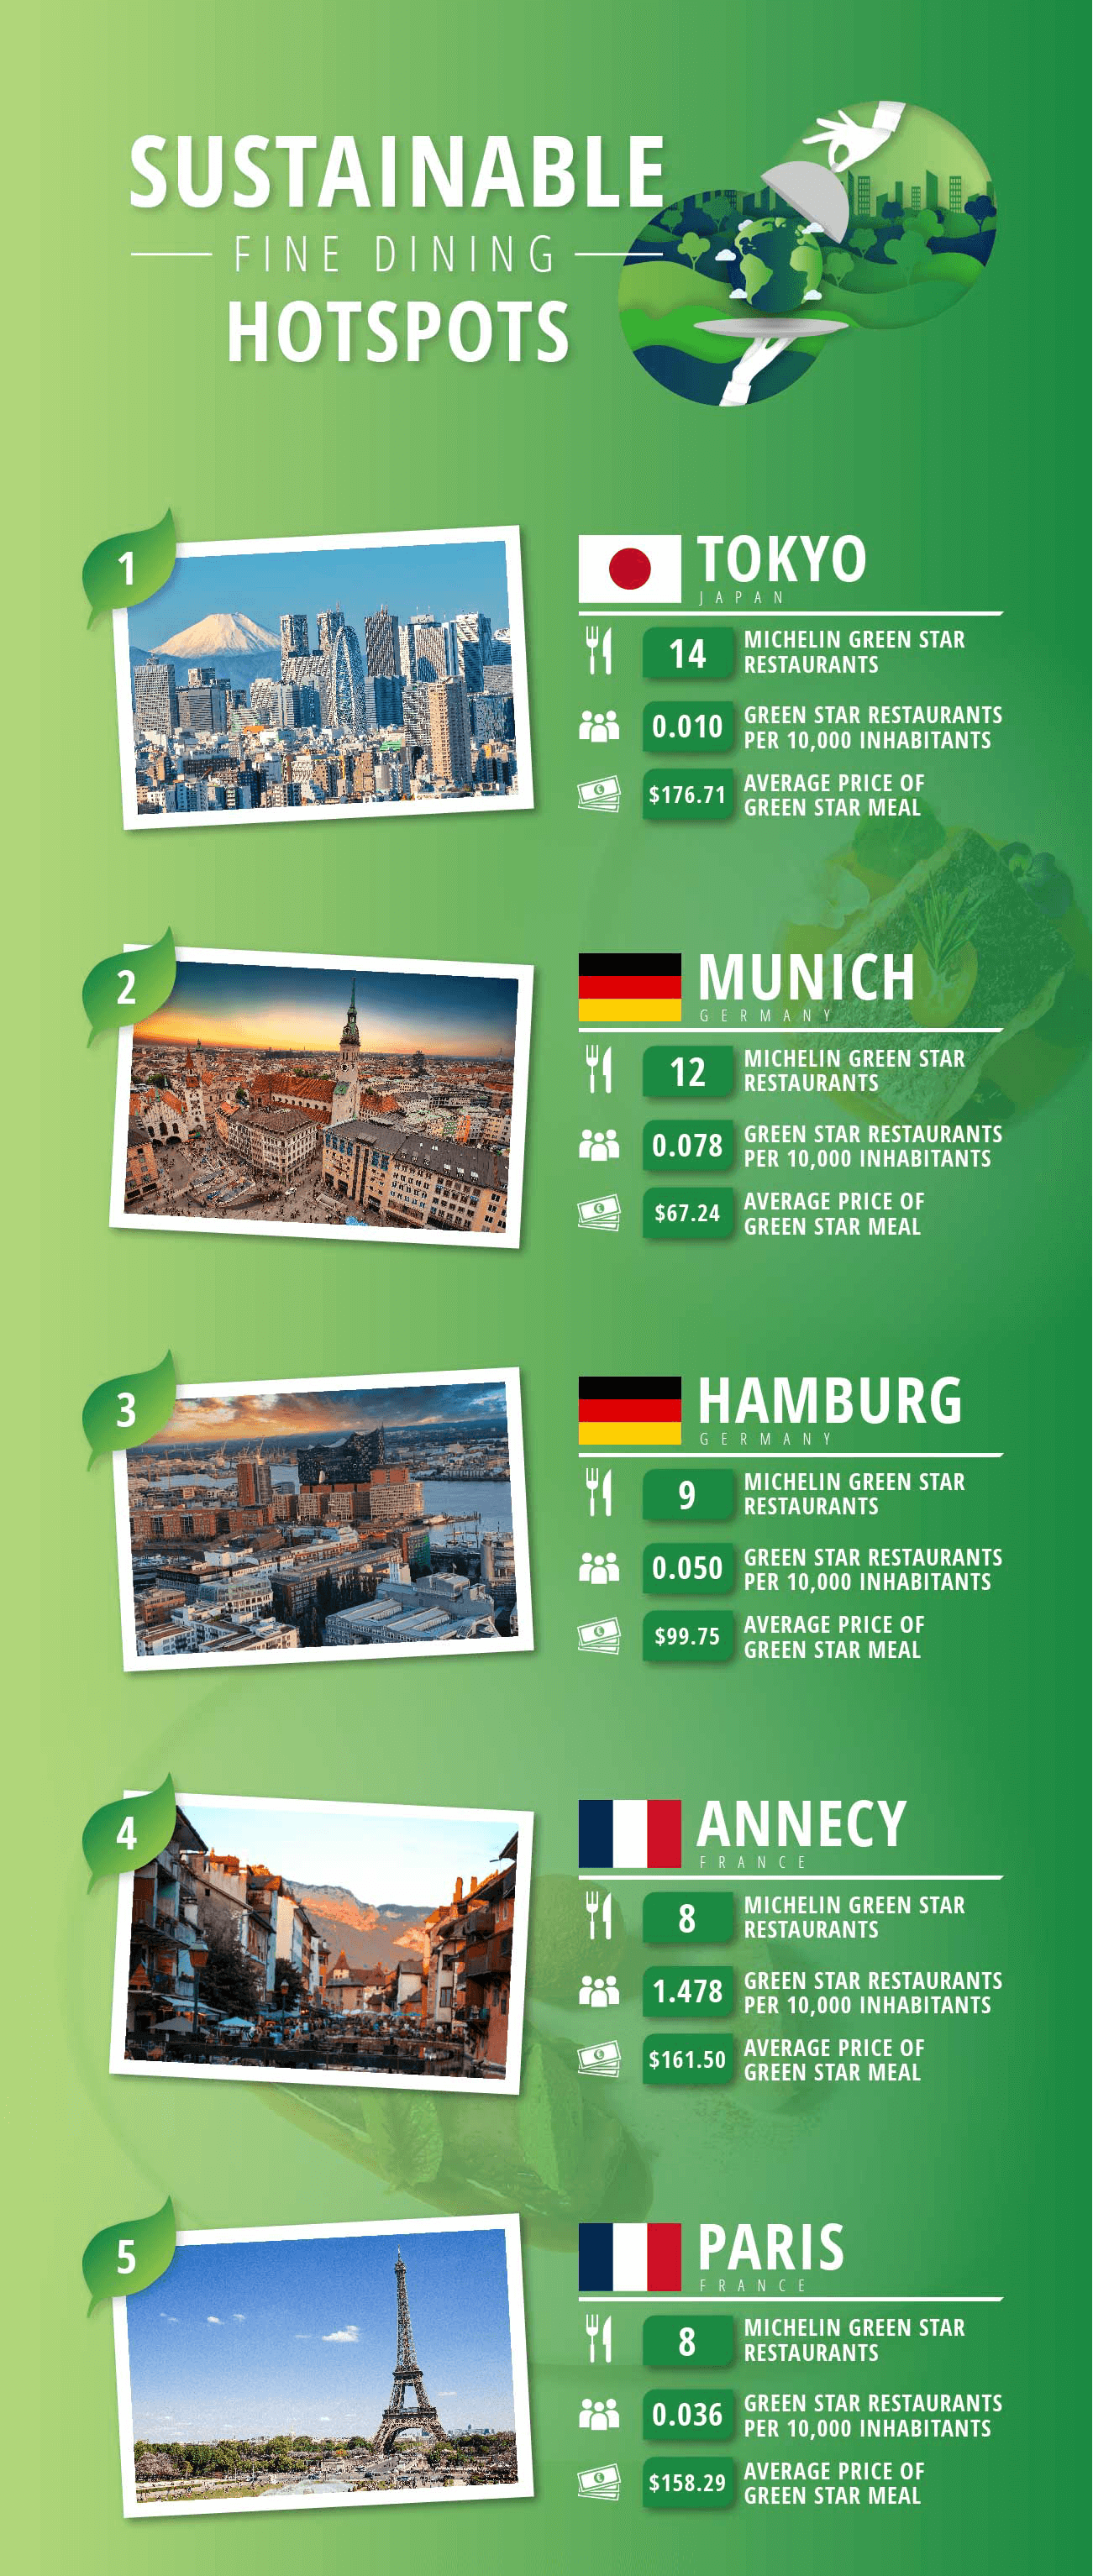 Ranking image showing cities Toyko, Munich, Hamburg, Annecy and Paris as sustainable fine dining hotspots.